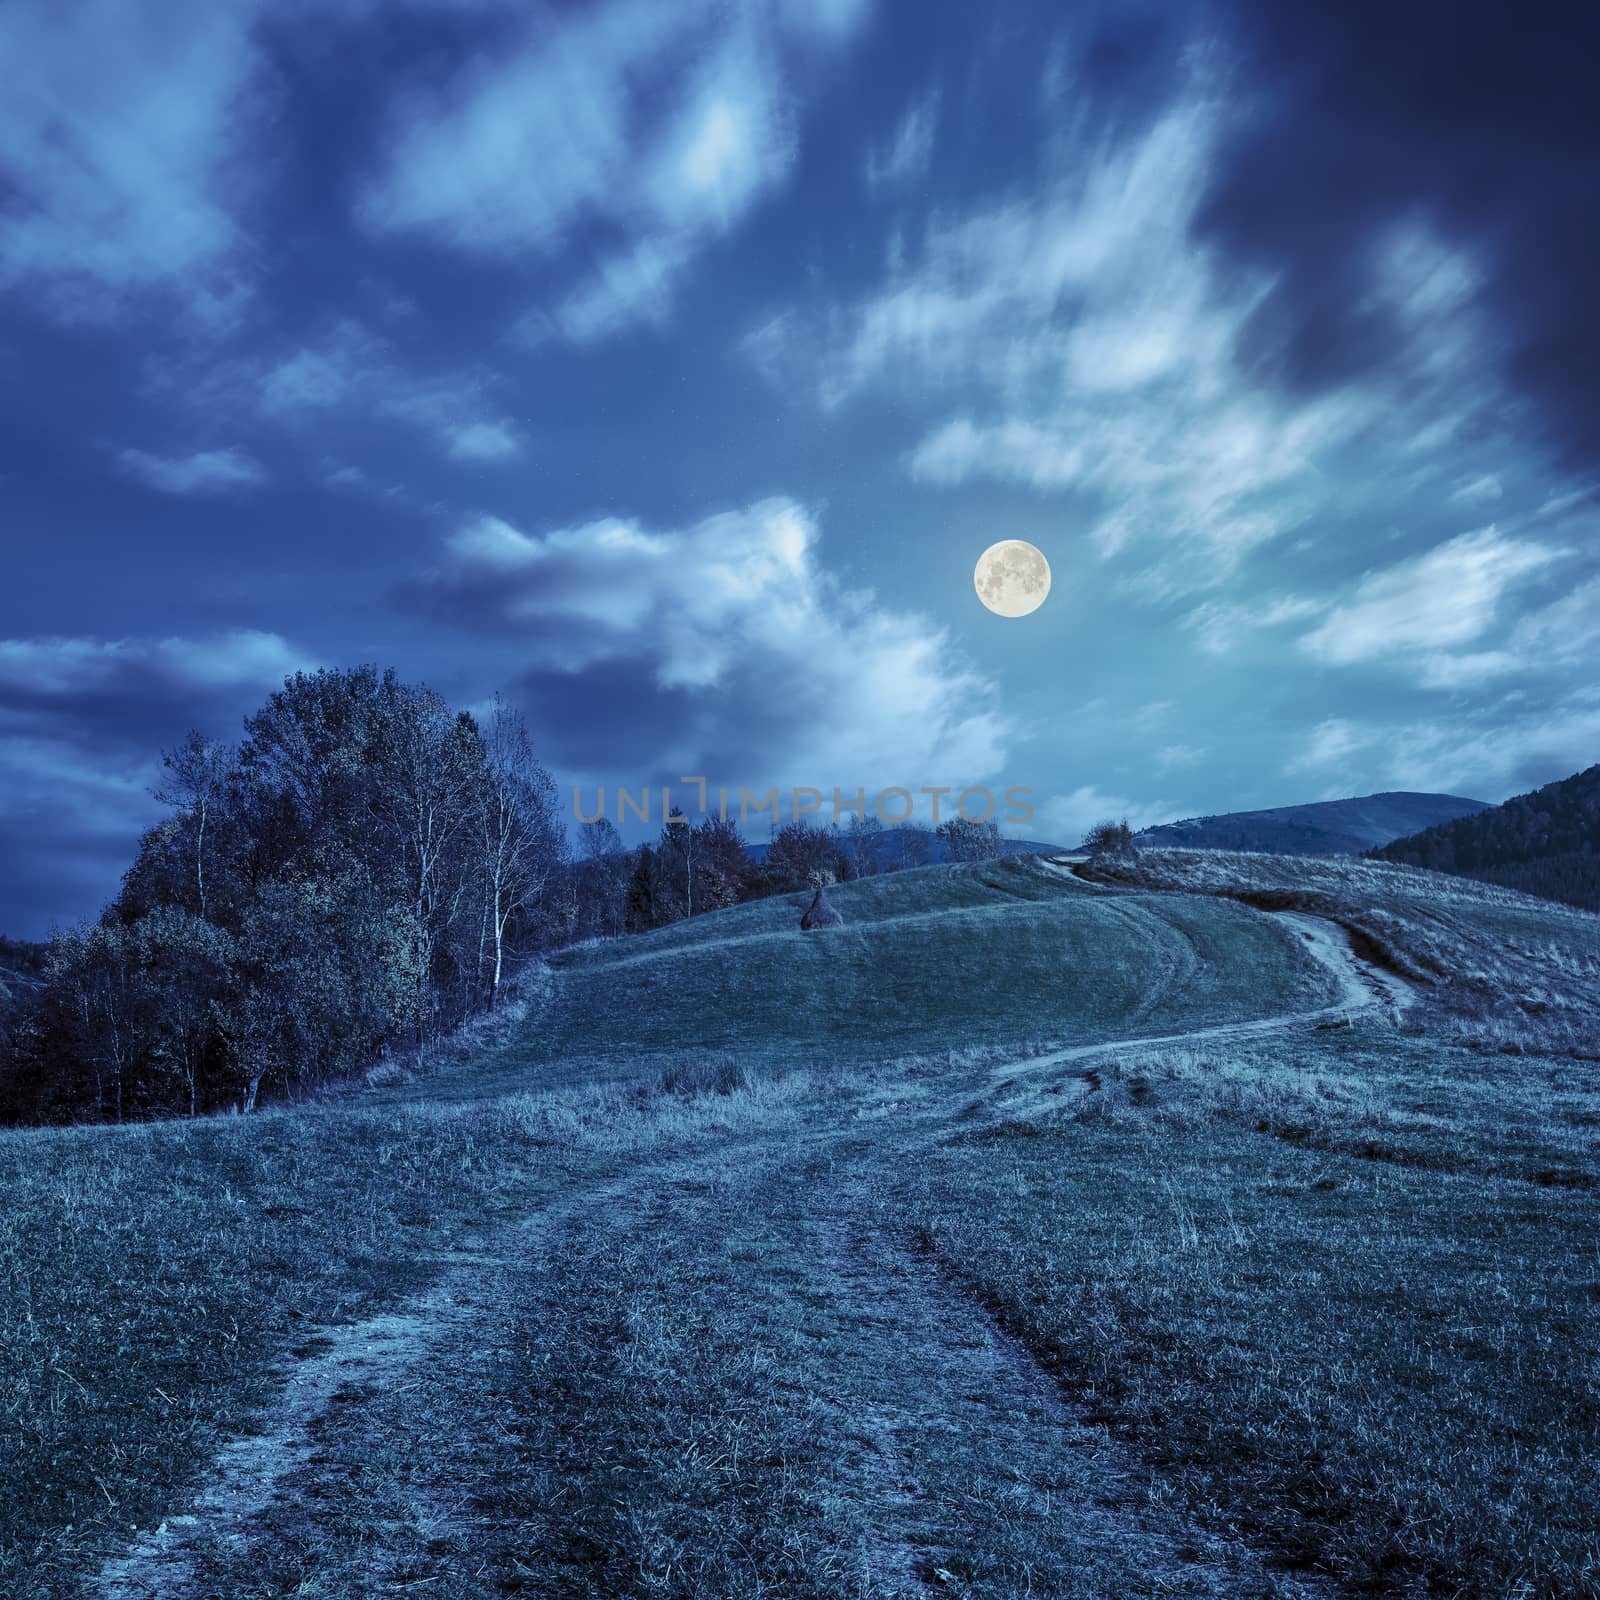 composite autumn landscape. path through the meadow on mountain top at  night in full moon light